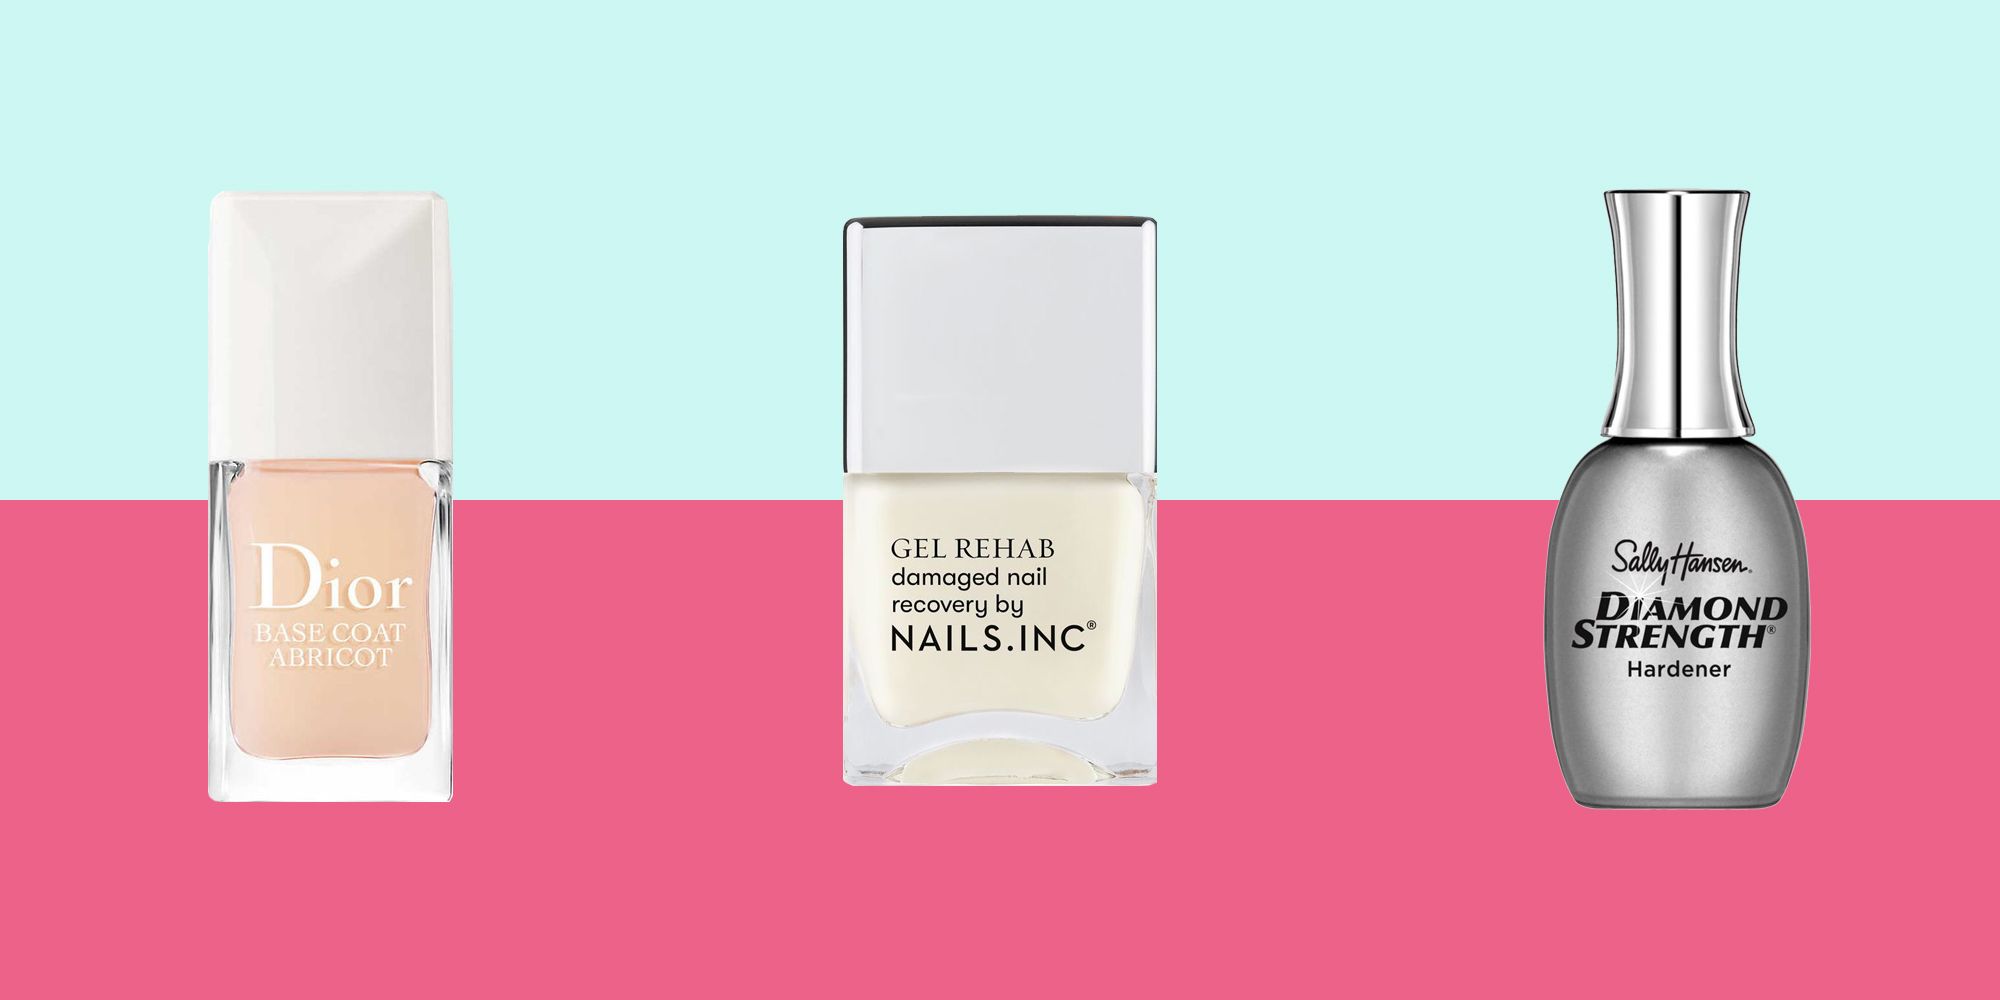 Share 167+ best nail care products uk